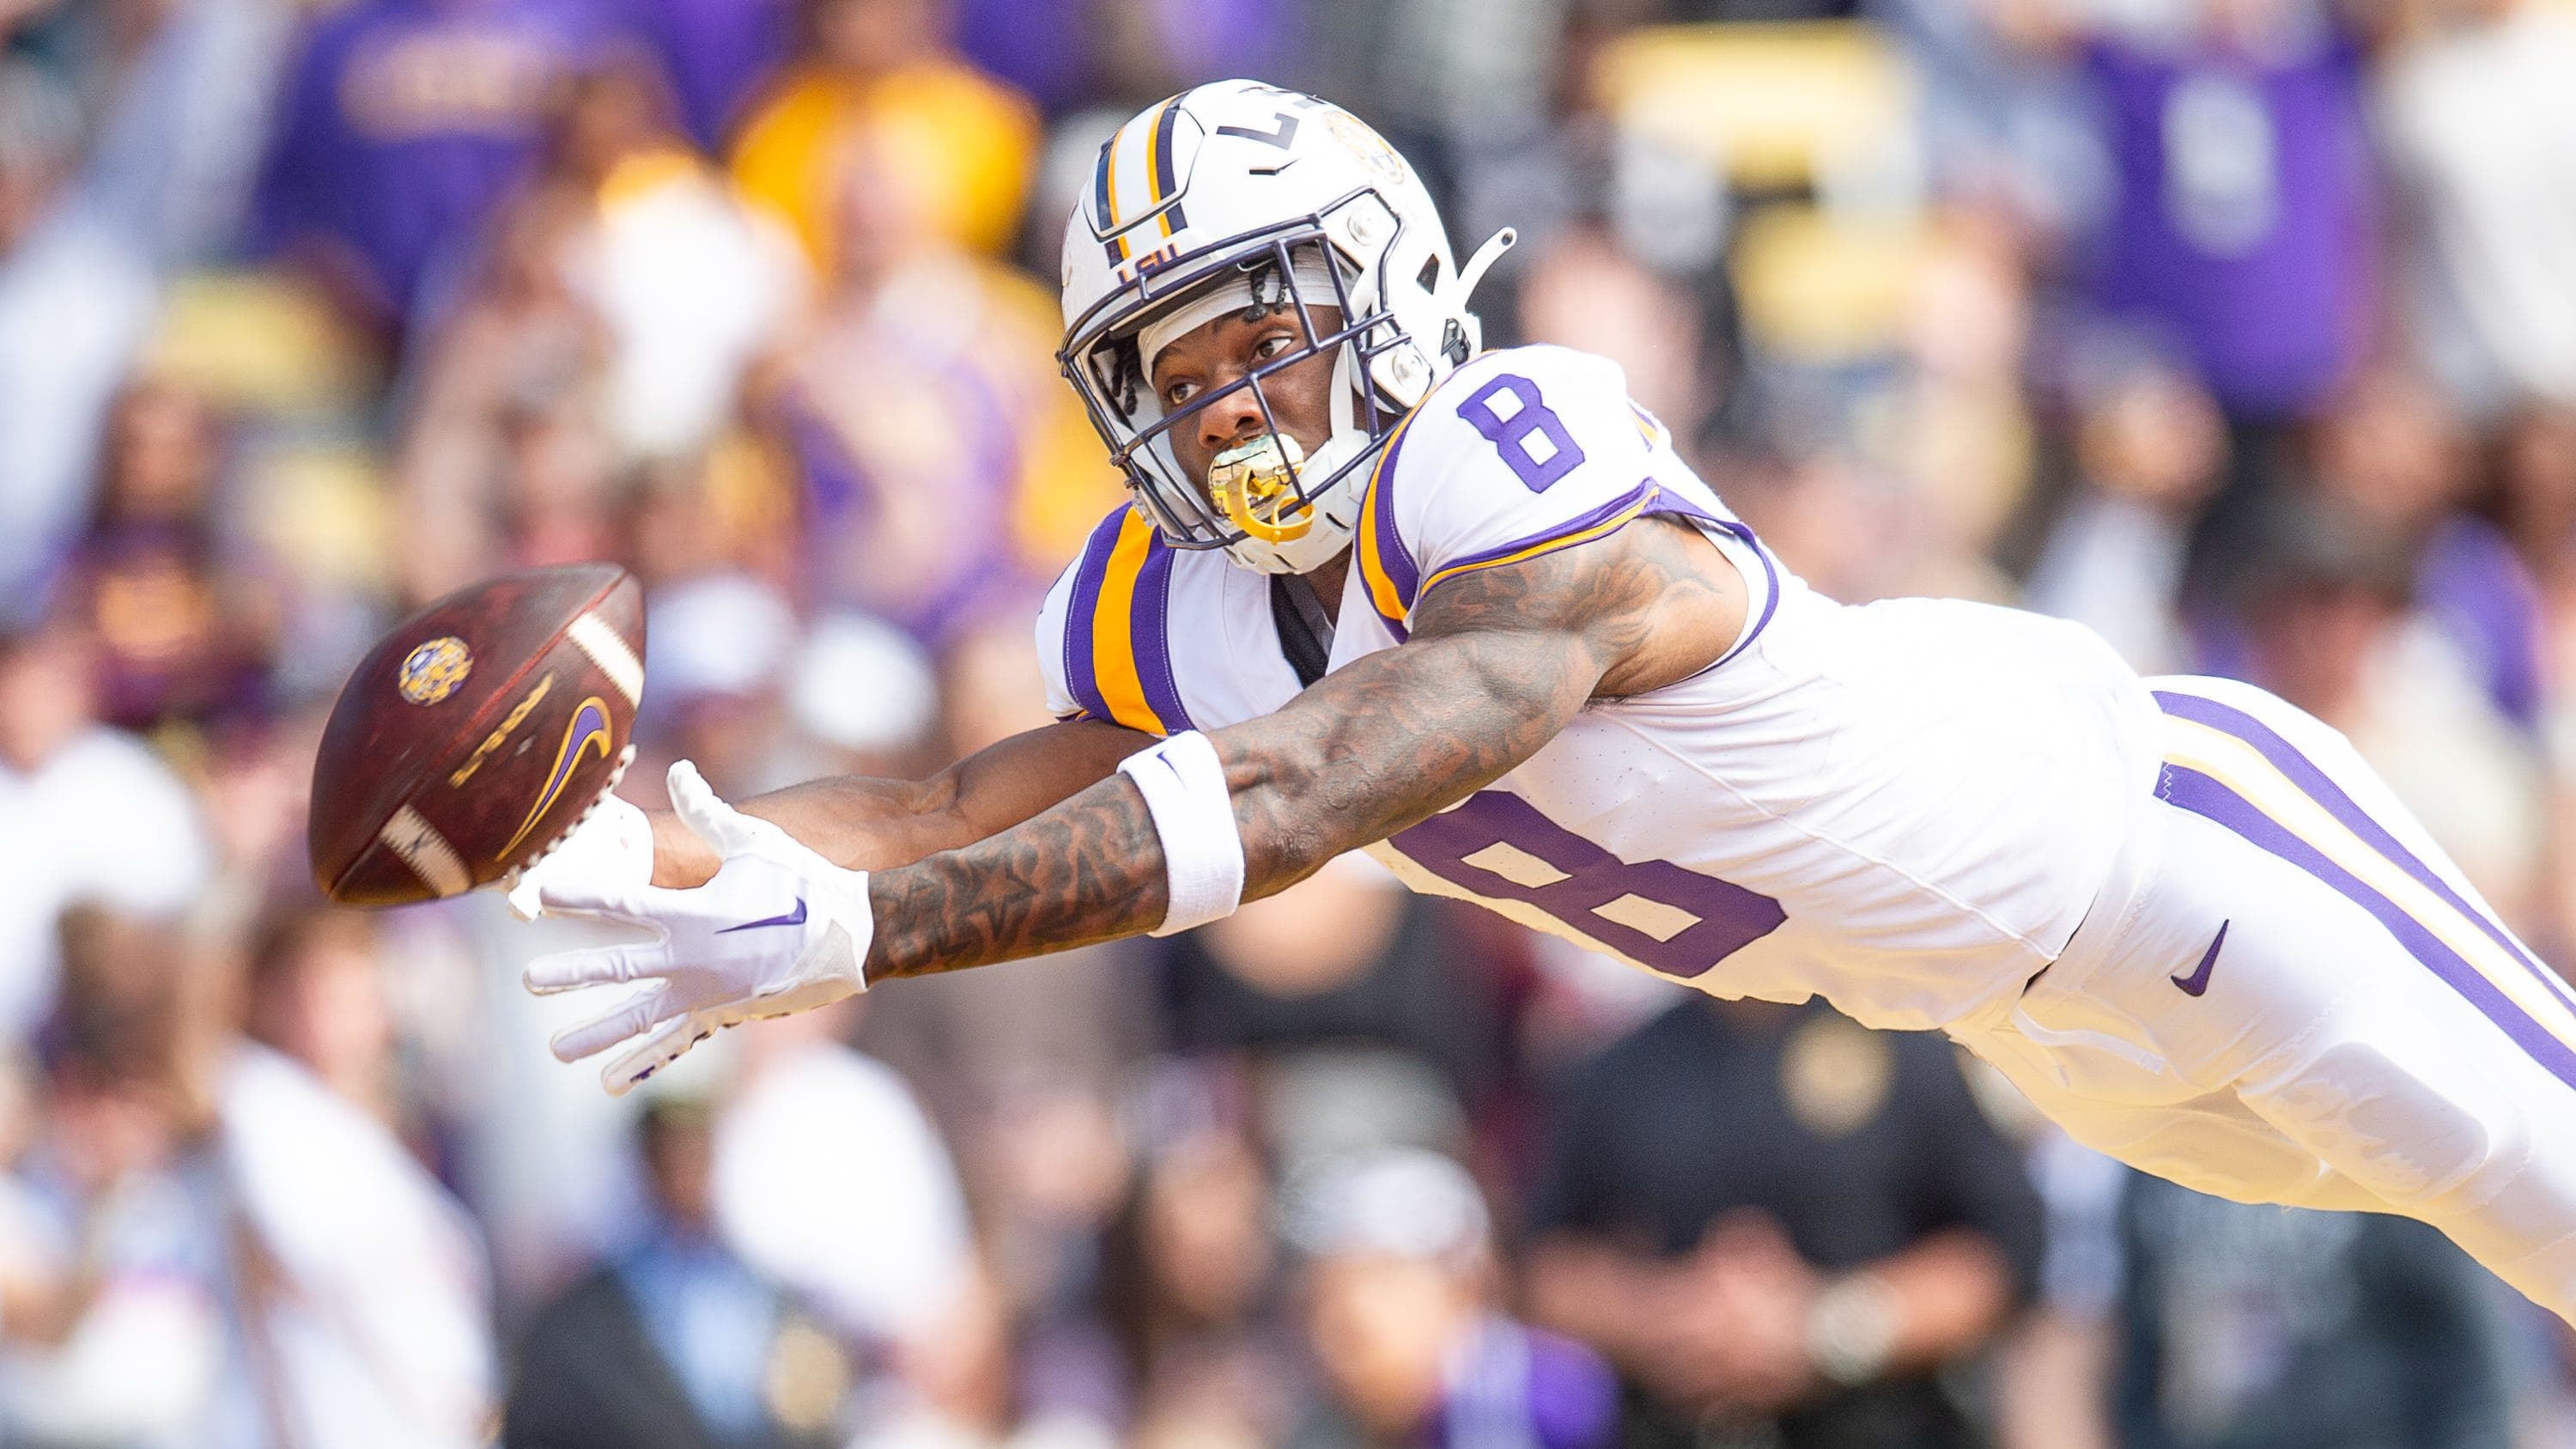 Malik Nabers dives for a ball as the LSU Tigers take on the Texas A&M Aggies.